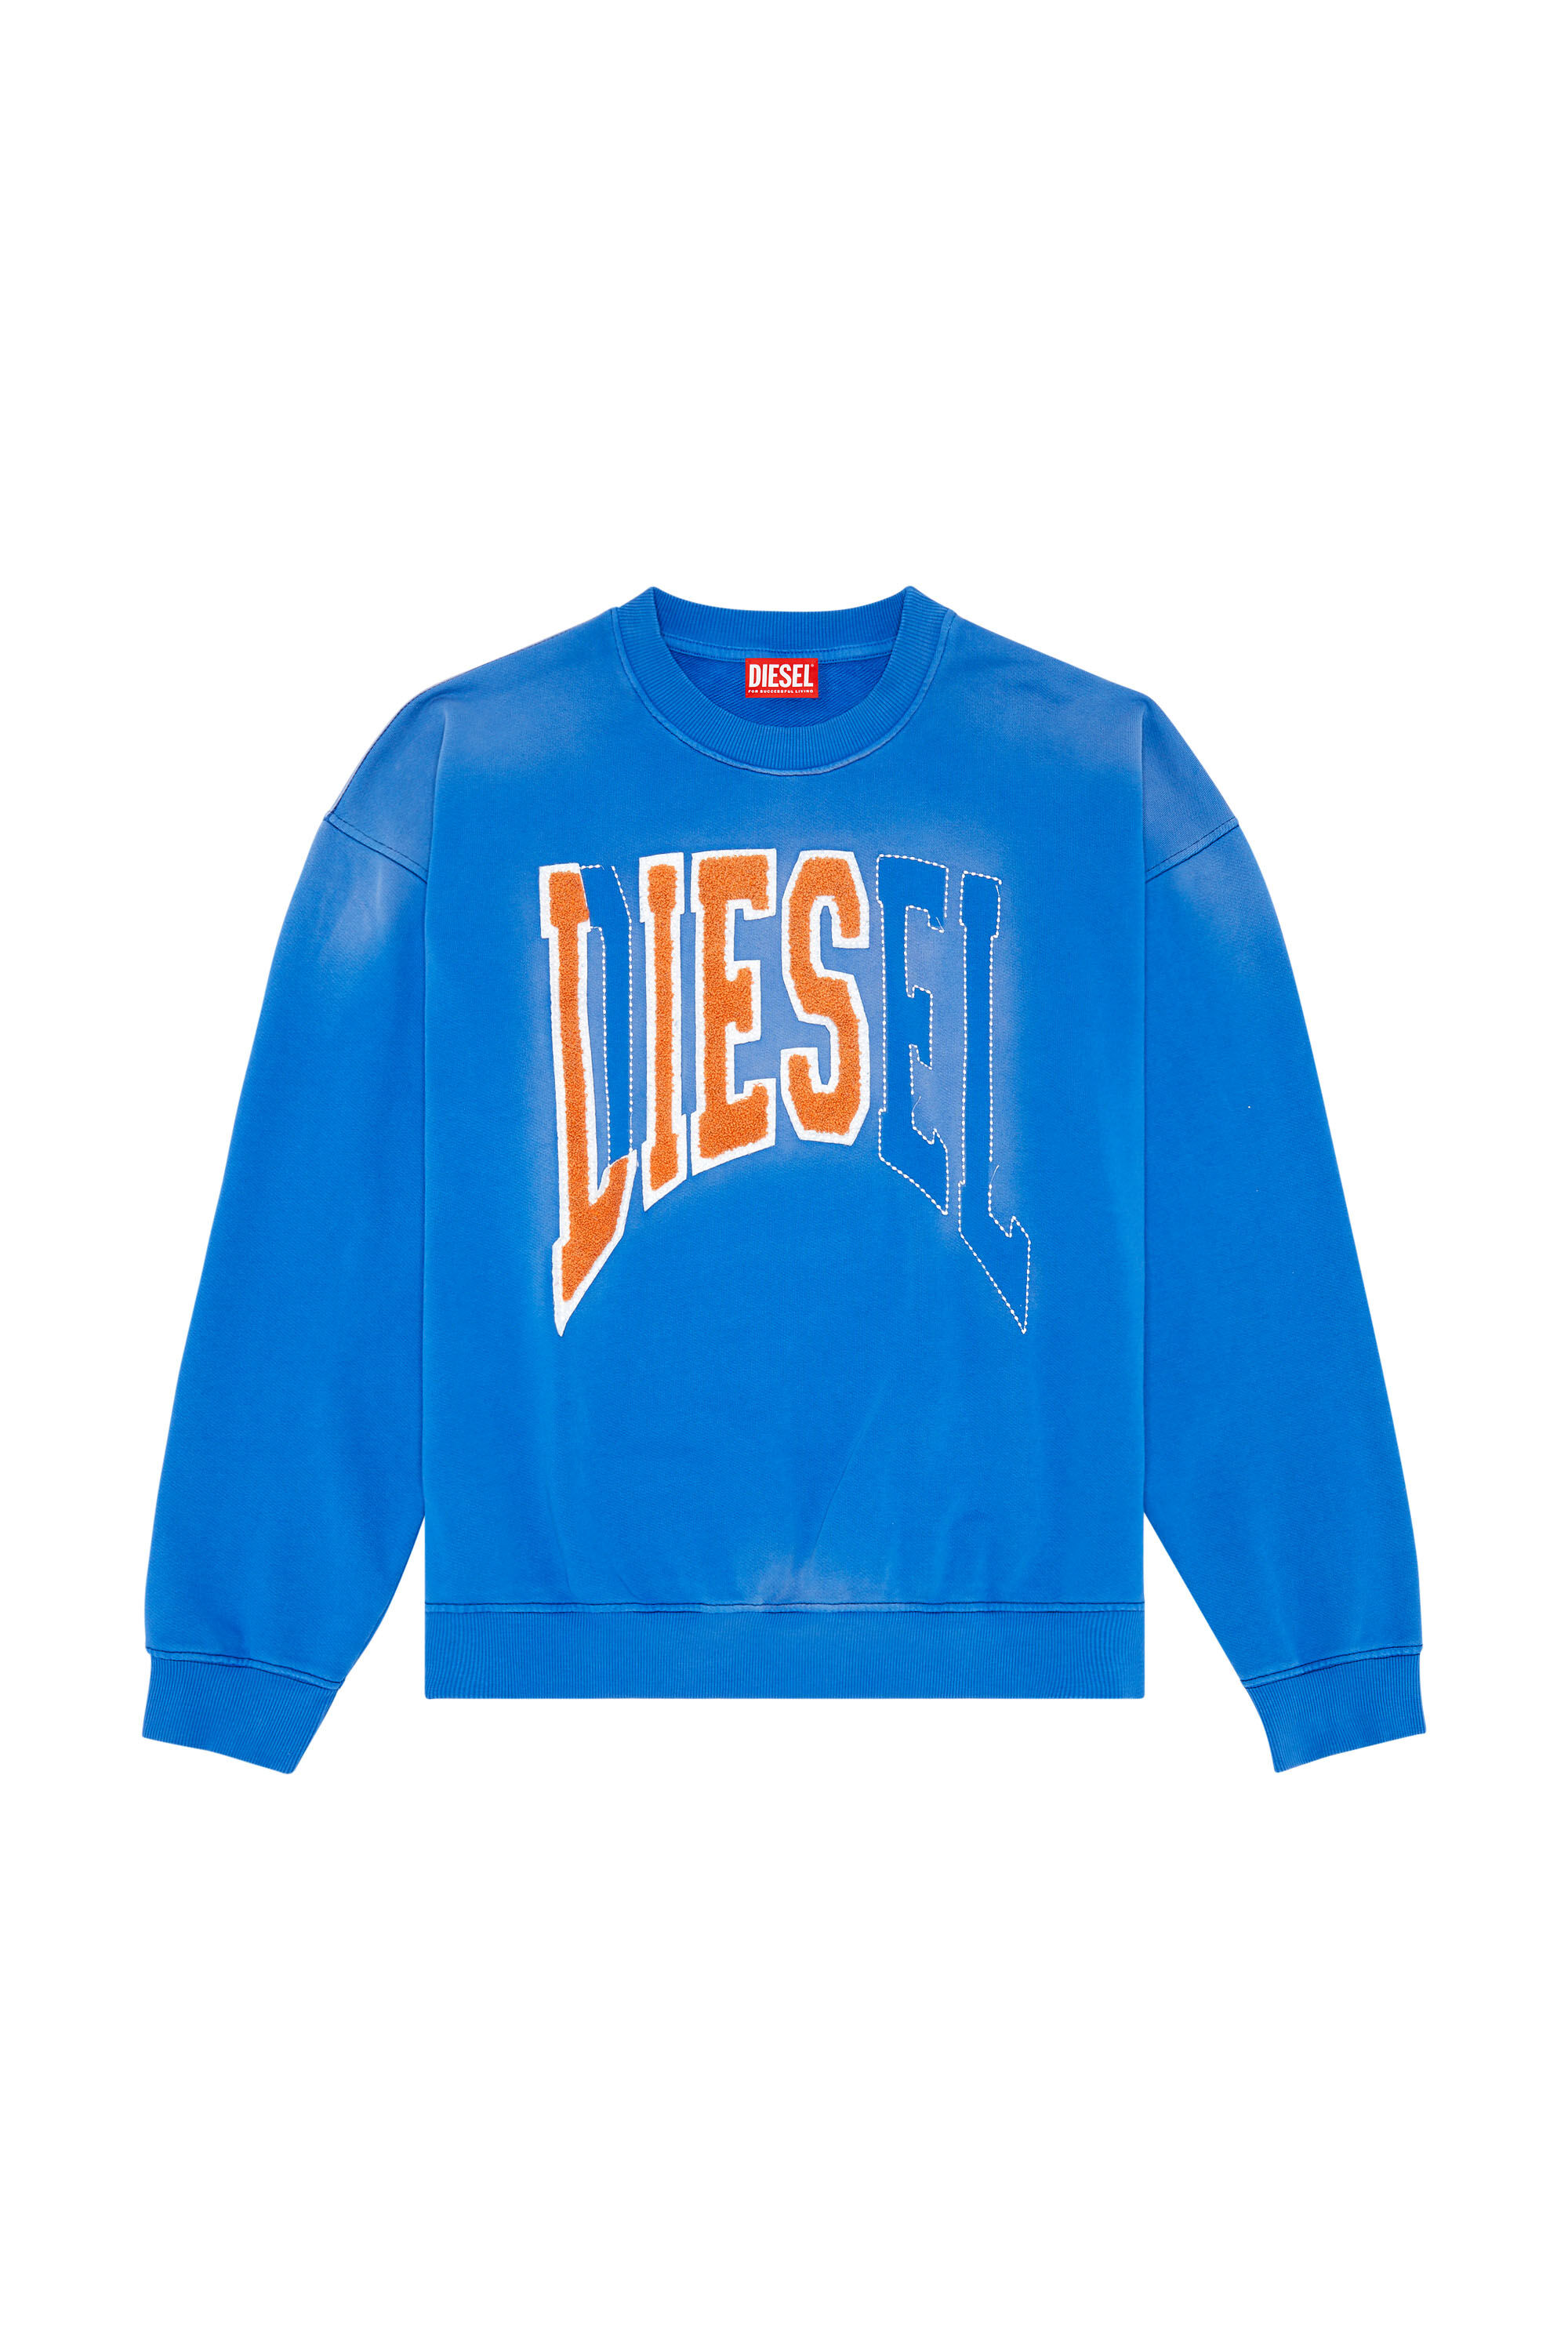 Diesel - S-BOXT-N6, Man College sweatshirt with LIES patches in Blue - Image 2